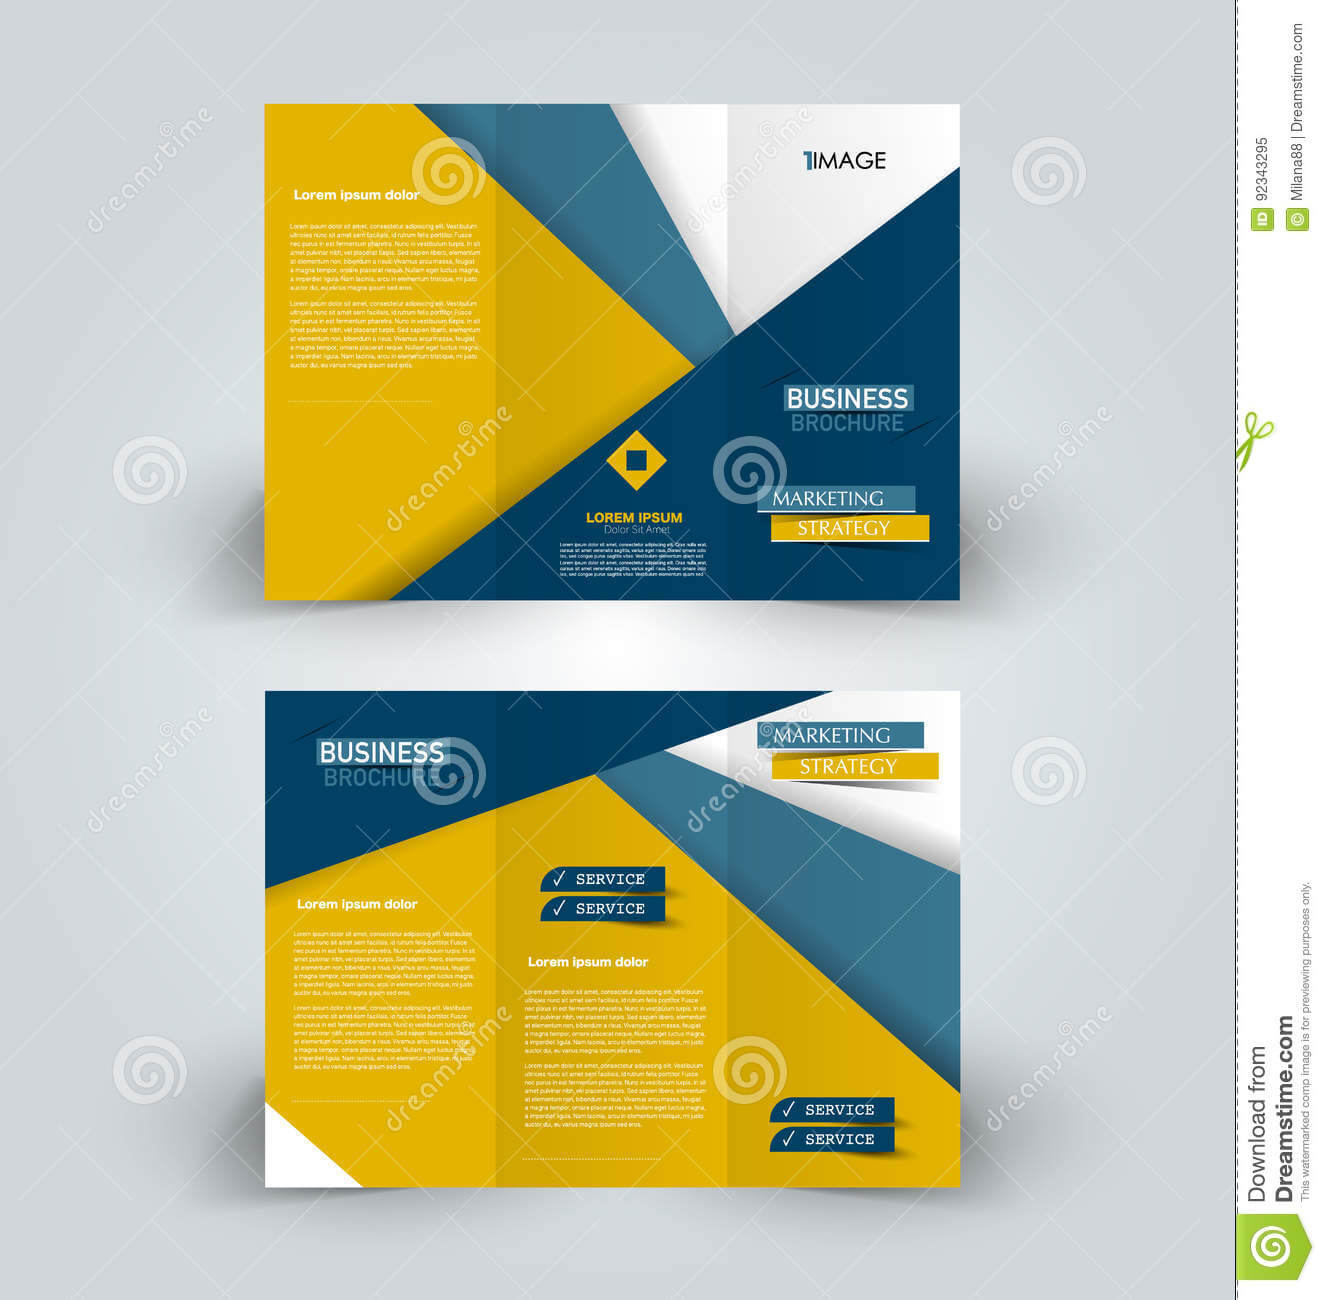 Brochure Design Template For Business Education For Brochure Design Templates For Education